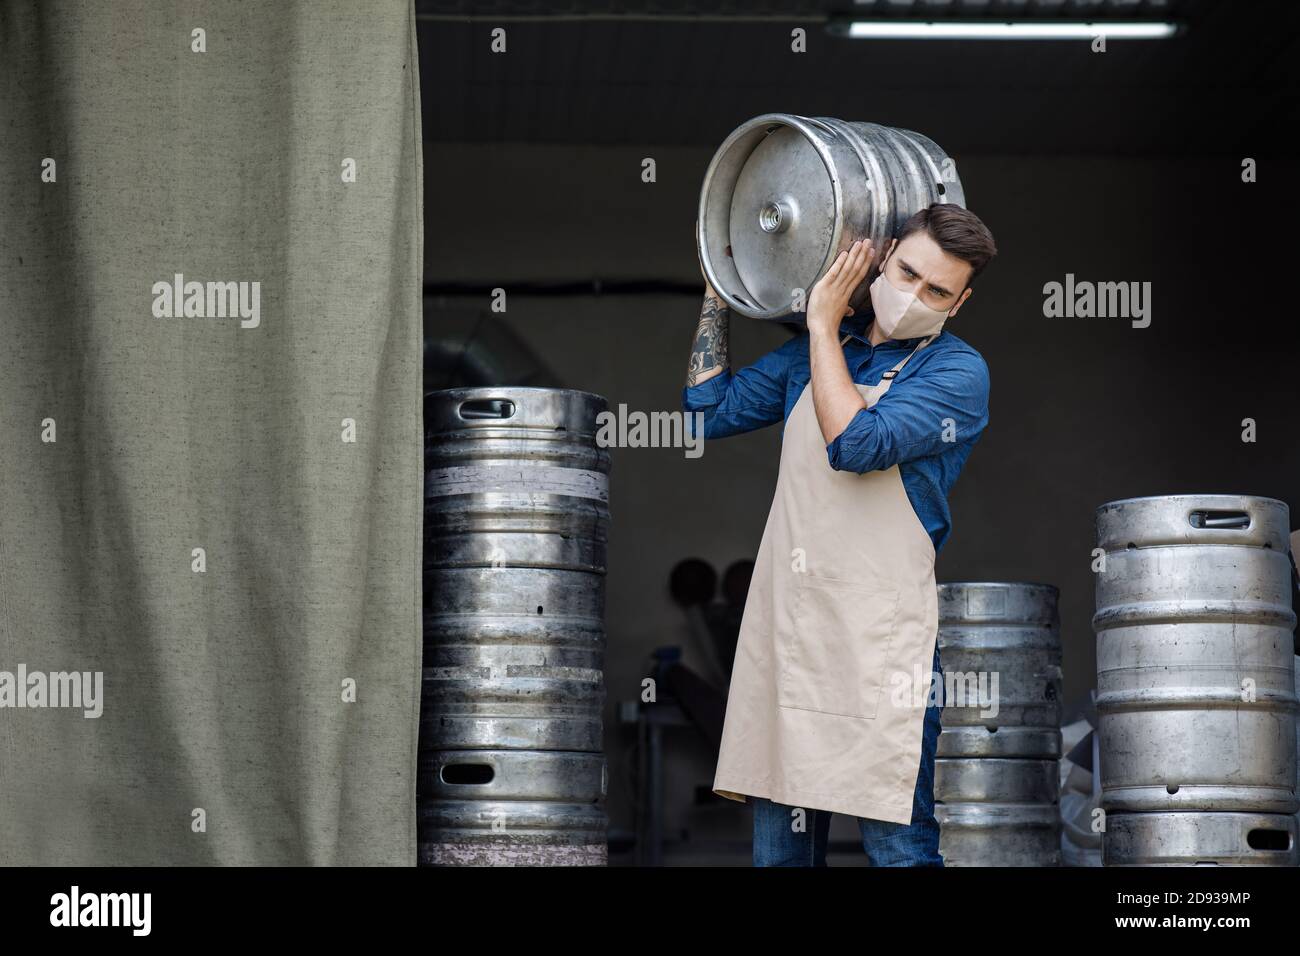 Startup of beer business and work at factory during COVID-19 epidemic Stock Photo